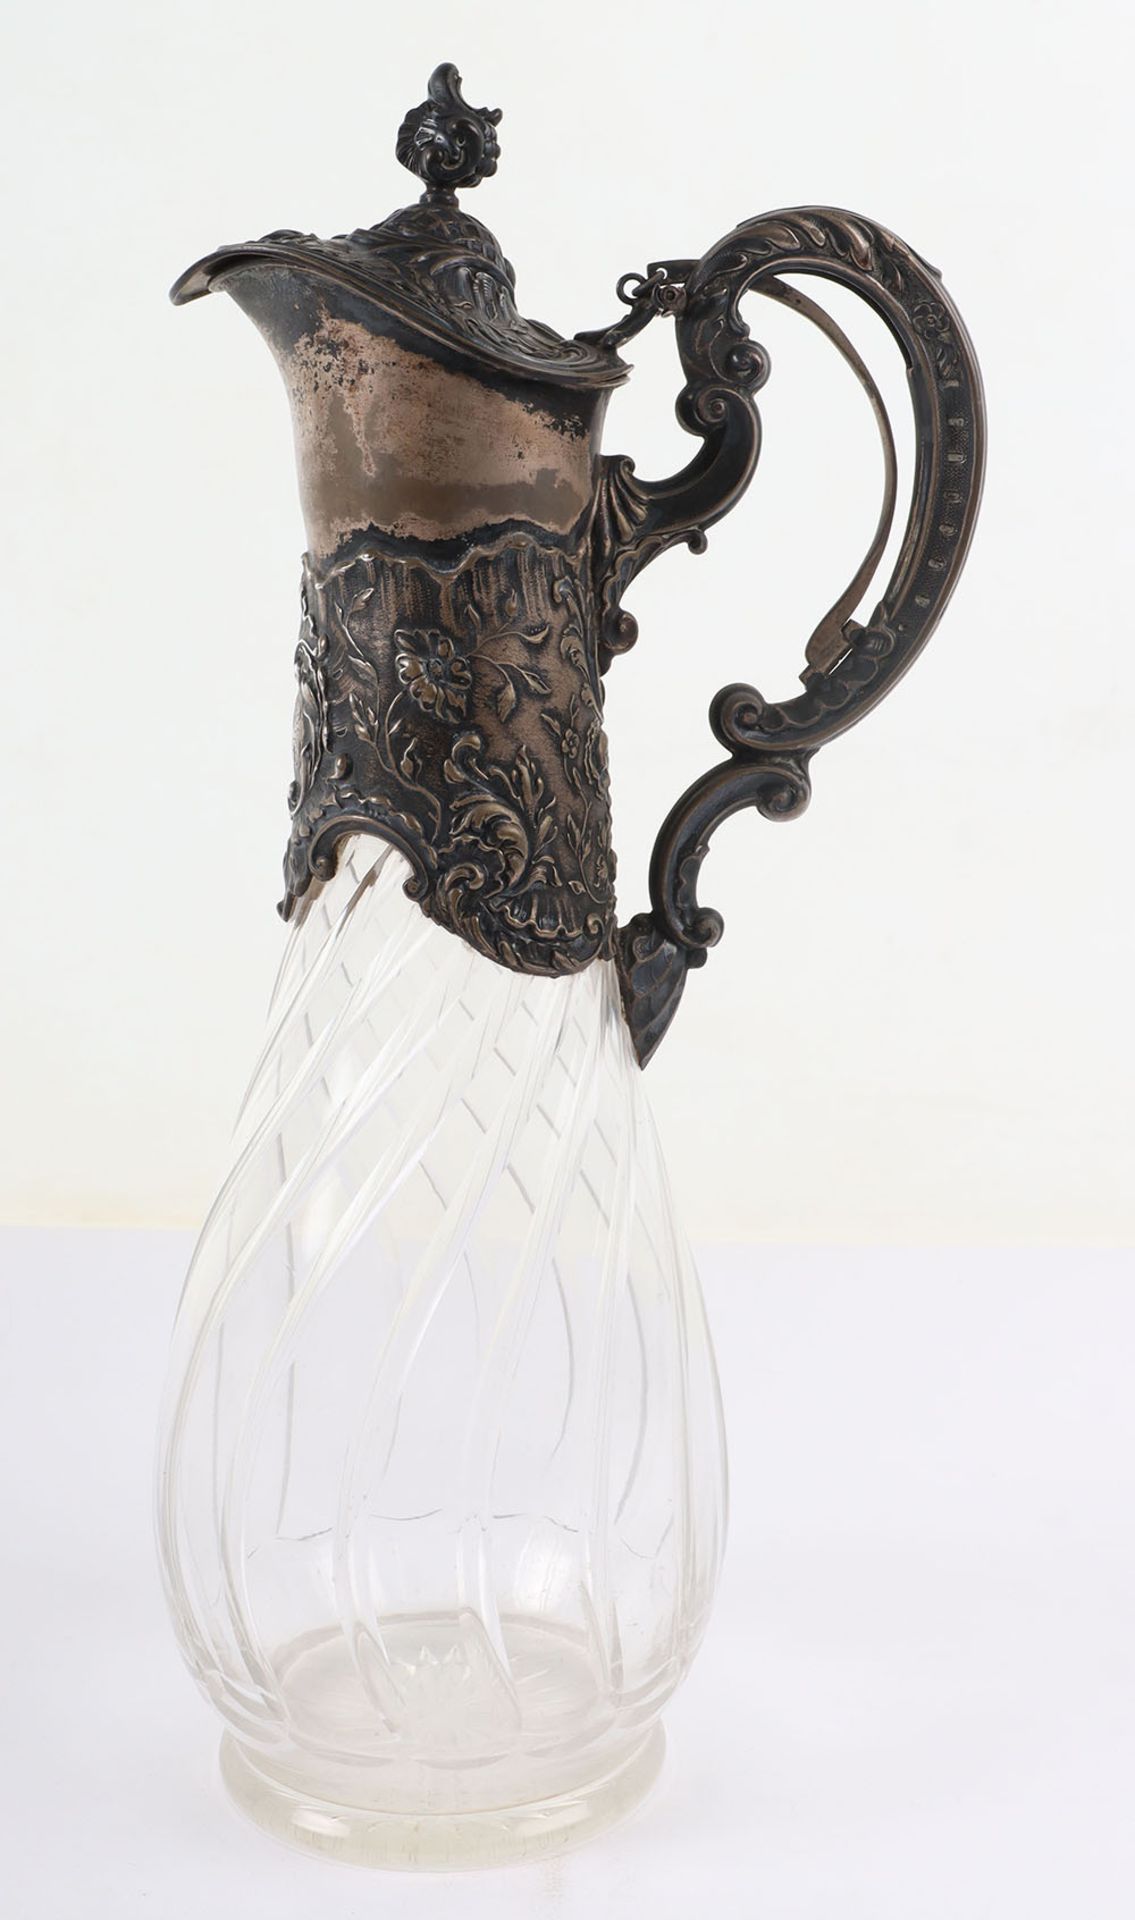 A German silver and glass claret jug - Image 6 of 10